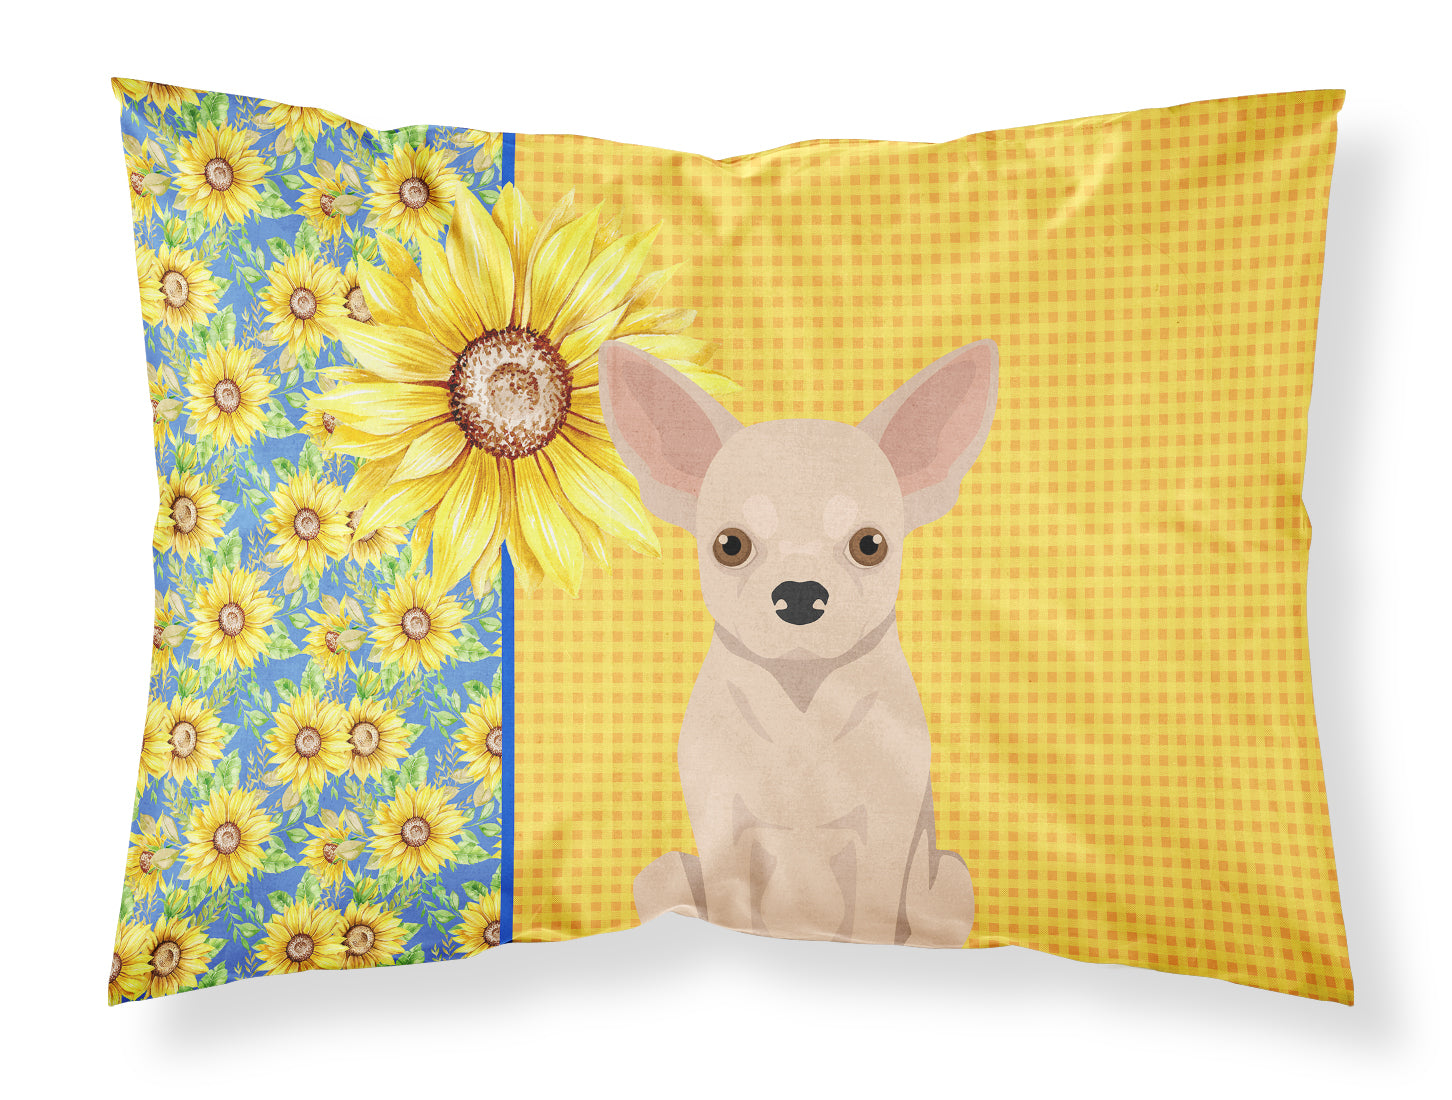 Buy this Summer Sunflowers Fawn Chihuahua Fabric Standard Pillowcase